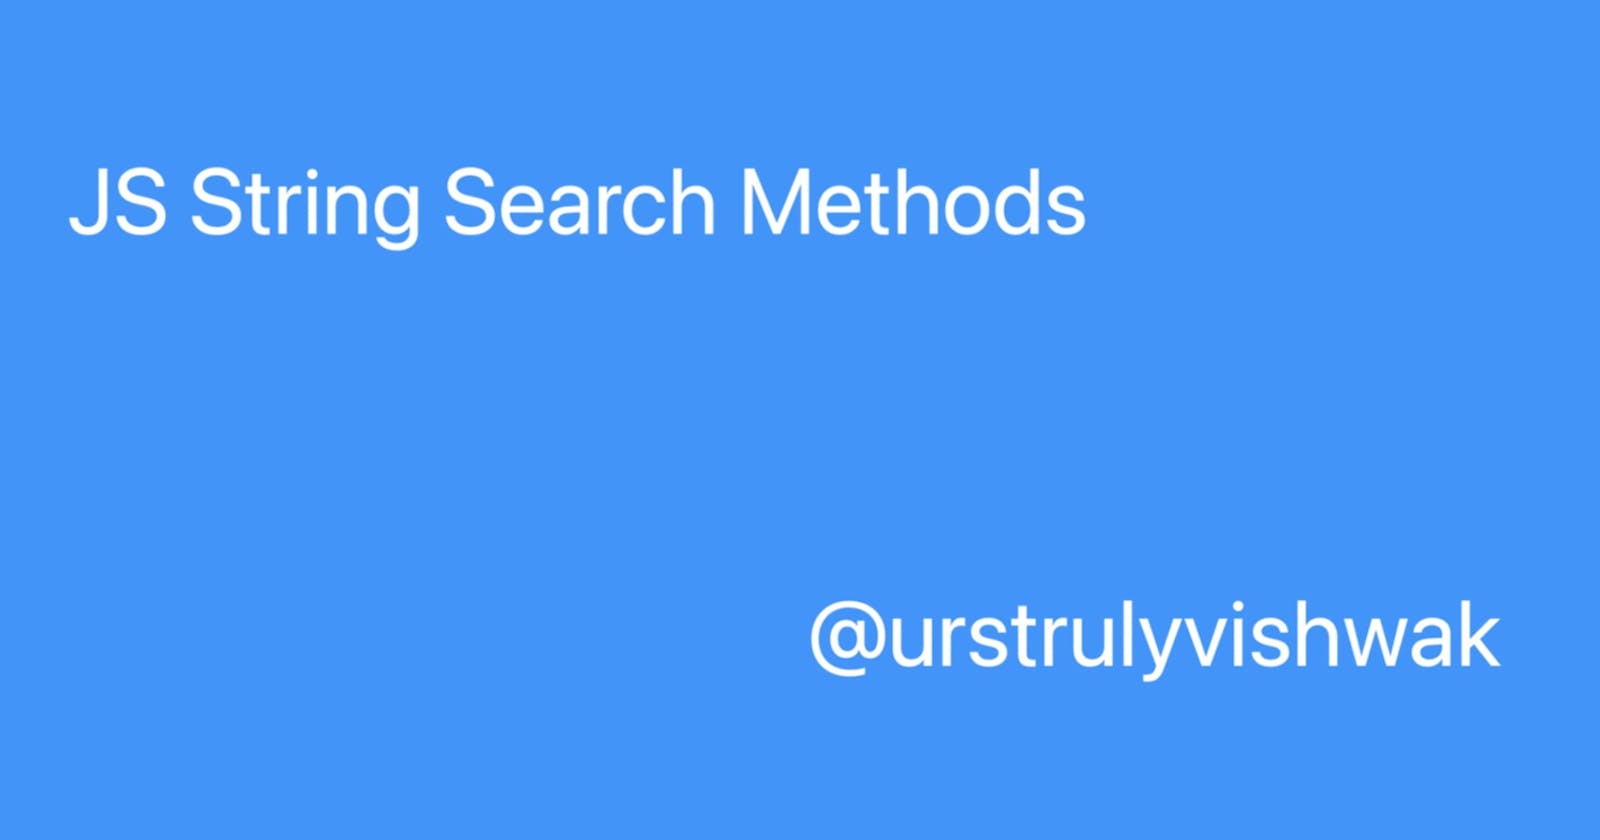 JS String Search Methods